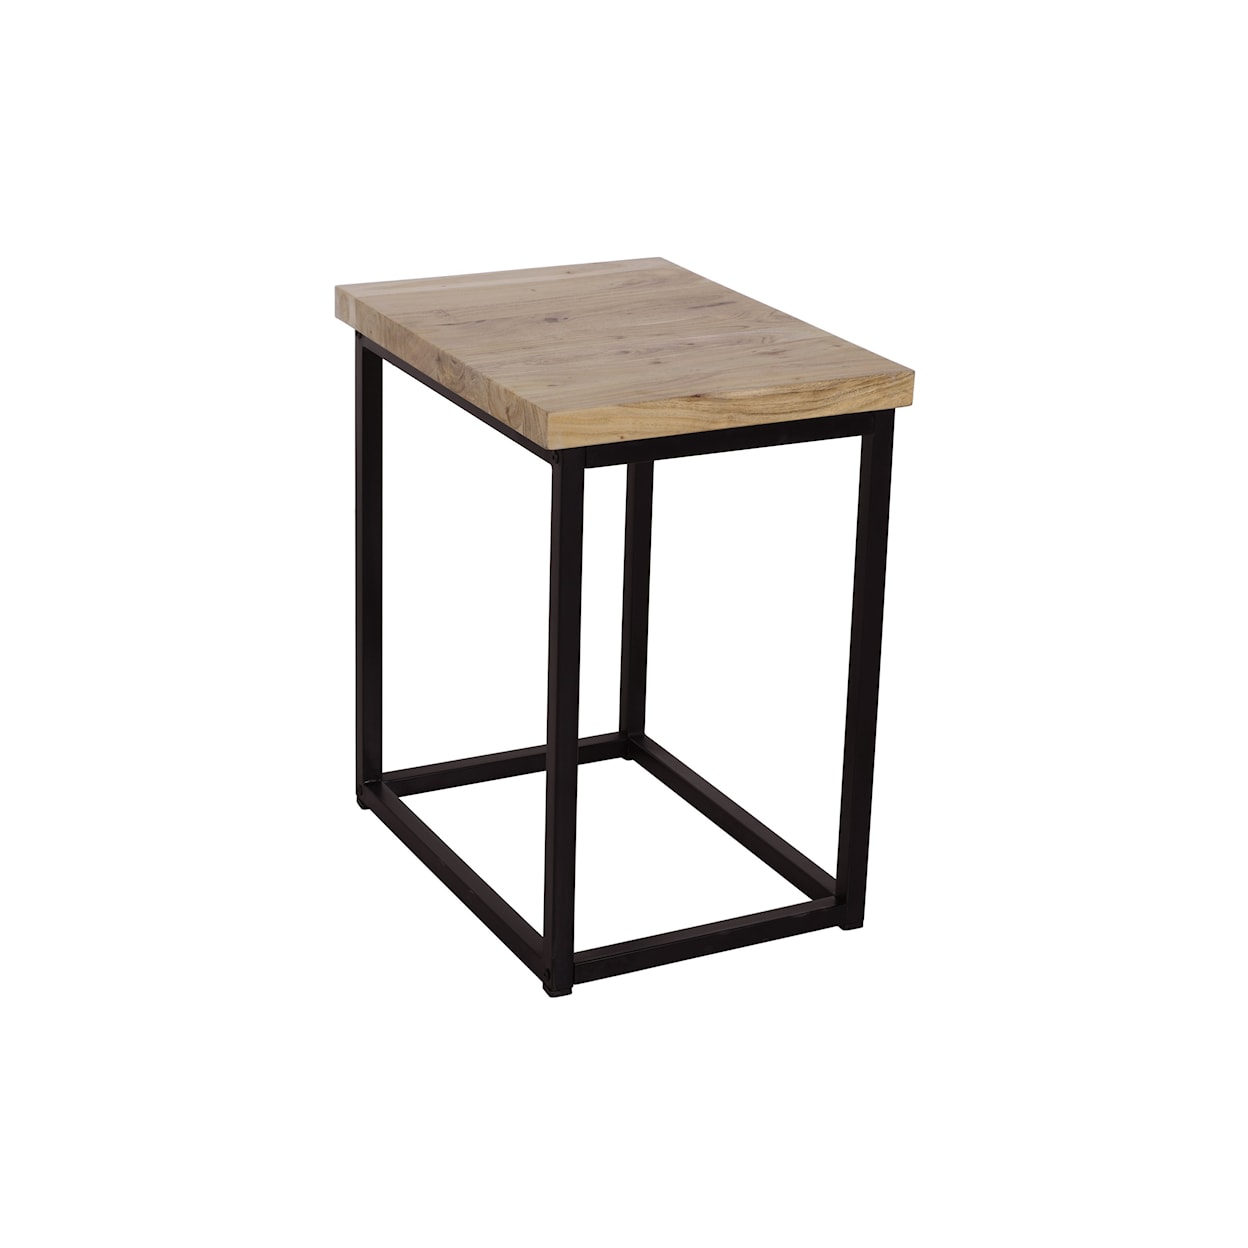 Jofran Ames Chair Side Table